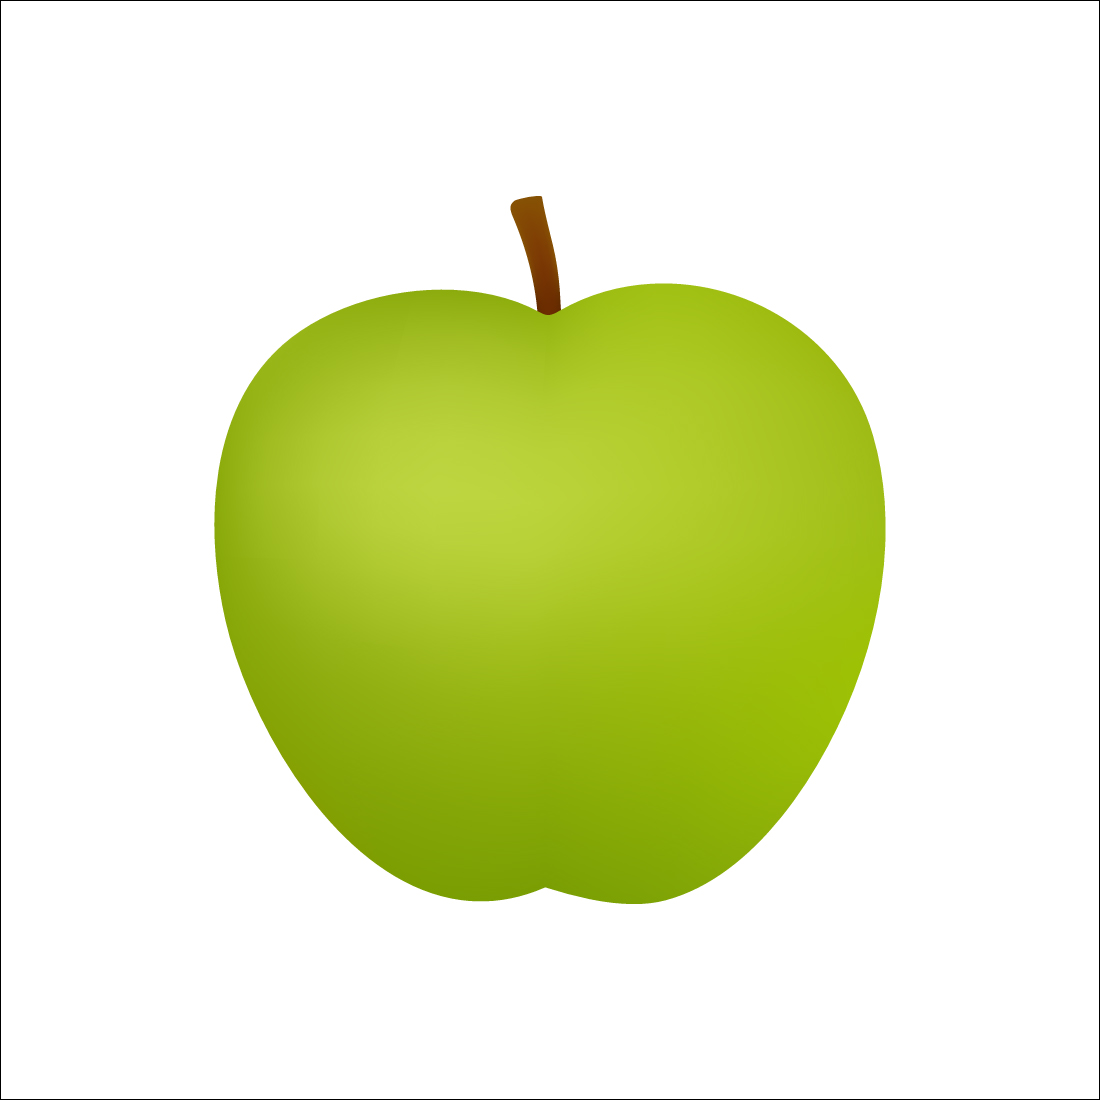 Green Apple Illustration On White Background preview image.